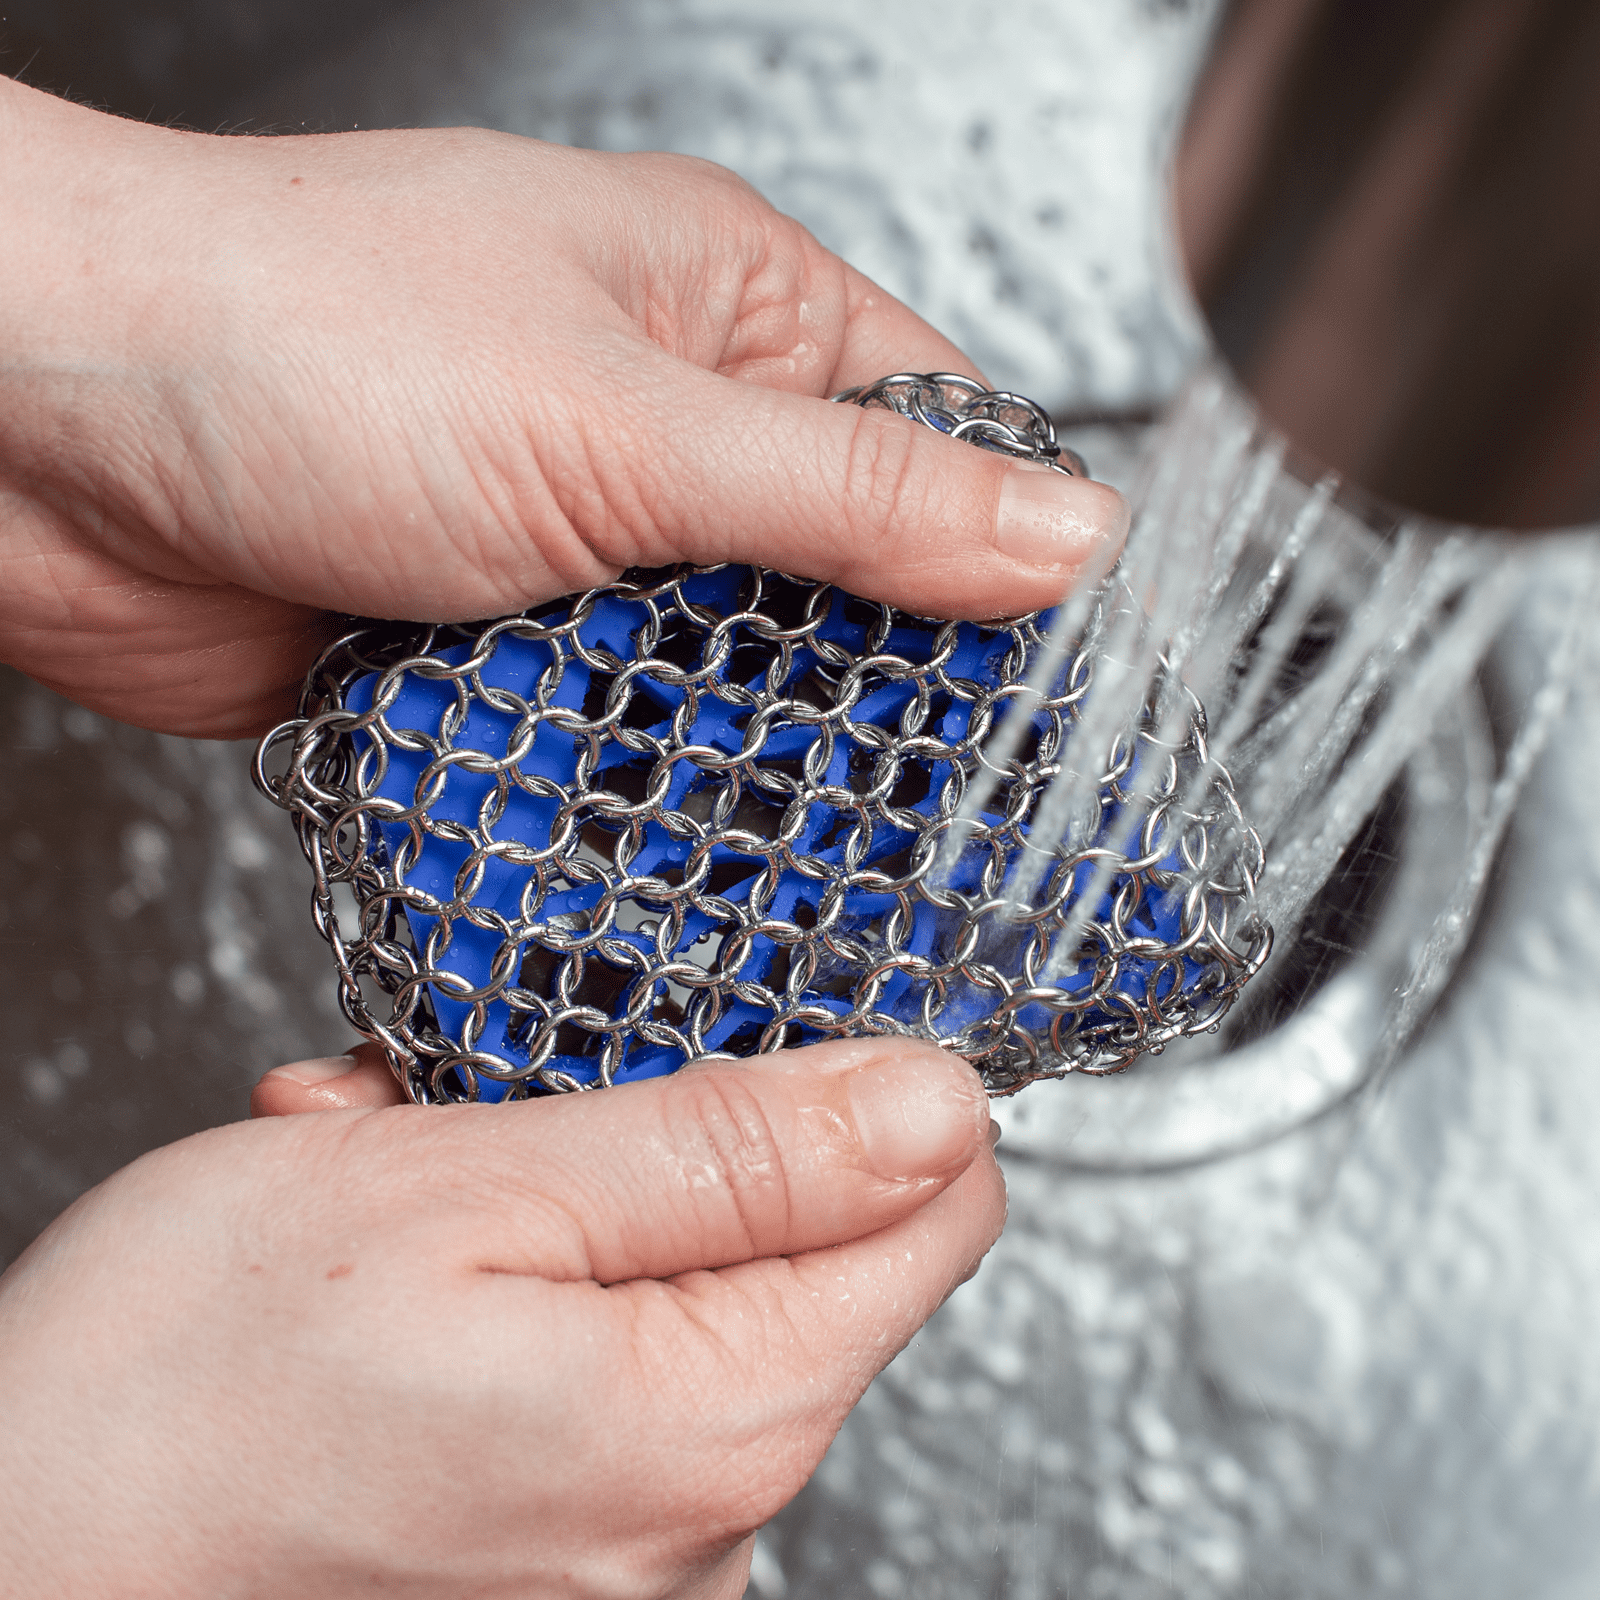 Lodge Chainmail Scrubber + Reviews